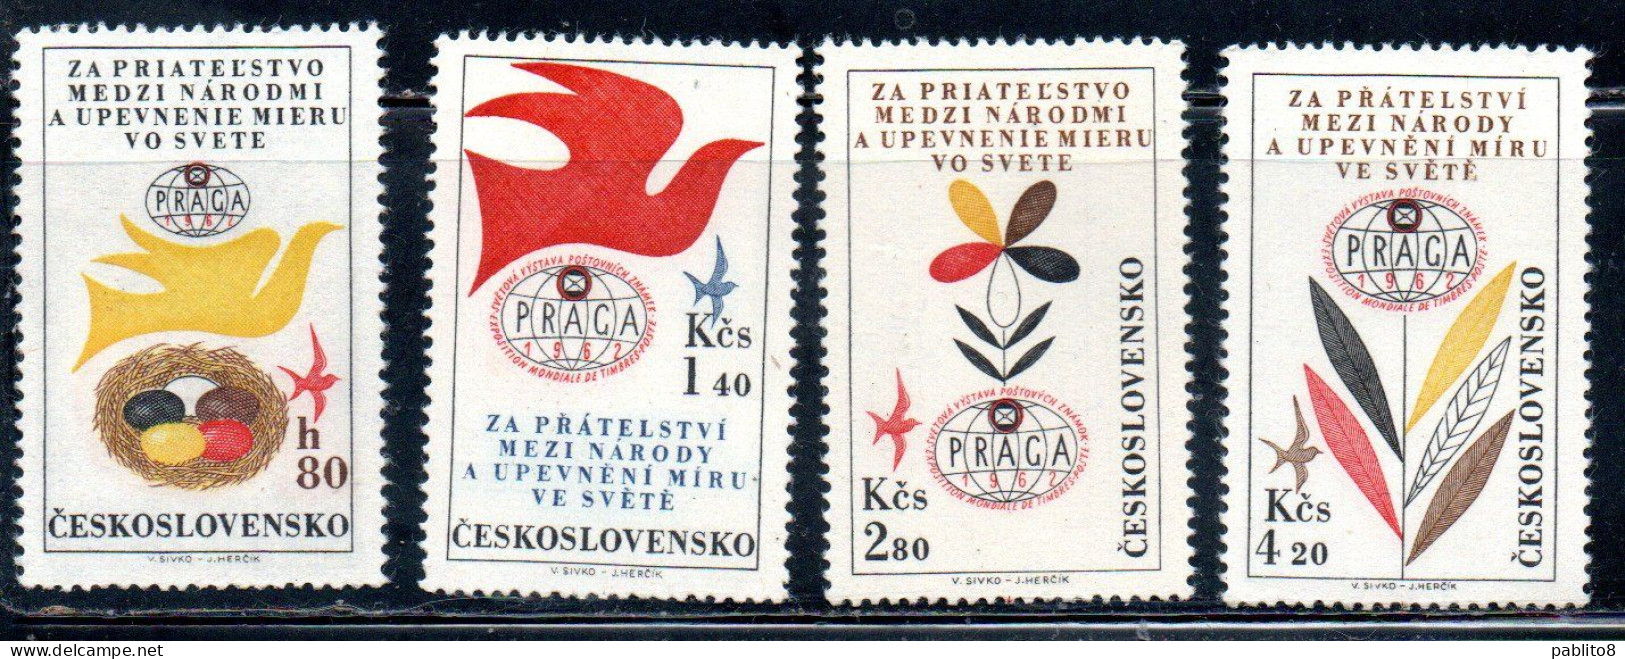 CZECHOSLOVAKIA CECOSLOVACCHIA 1962 AIR POST MAIL AIRMAIL PRAGA 62 WORLD EXHIBITION POSTAGE STAMPS COMPLETE SET SERIE MNH - Corréo Aéreo